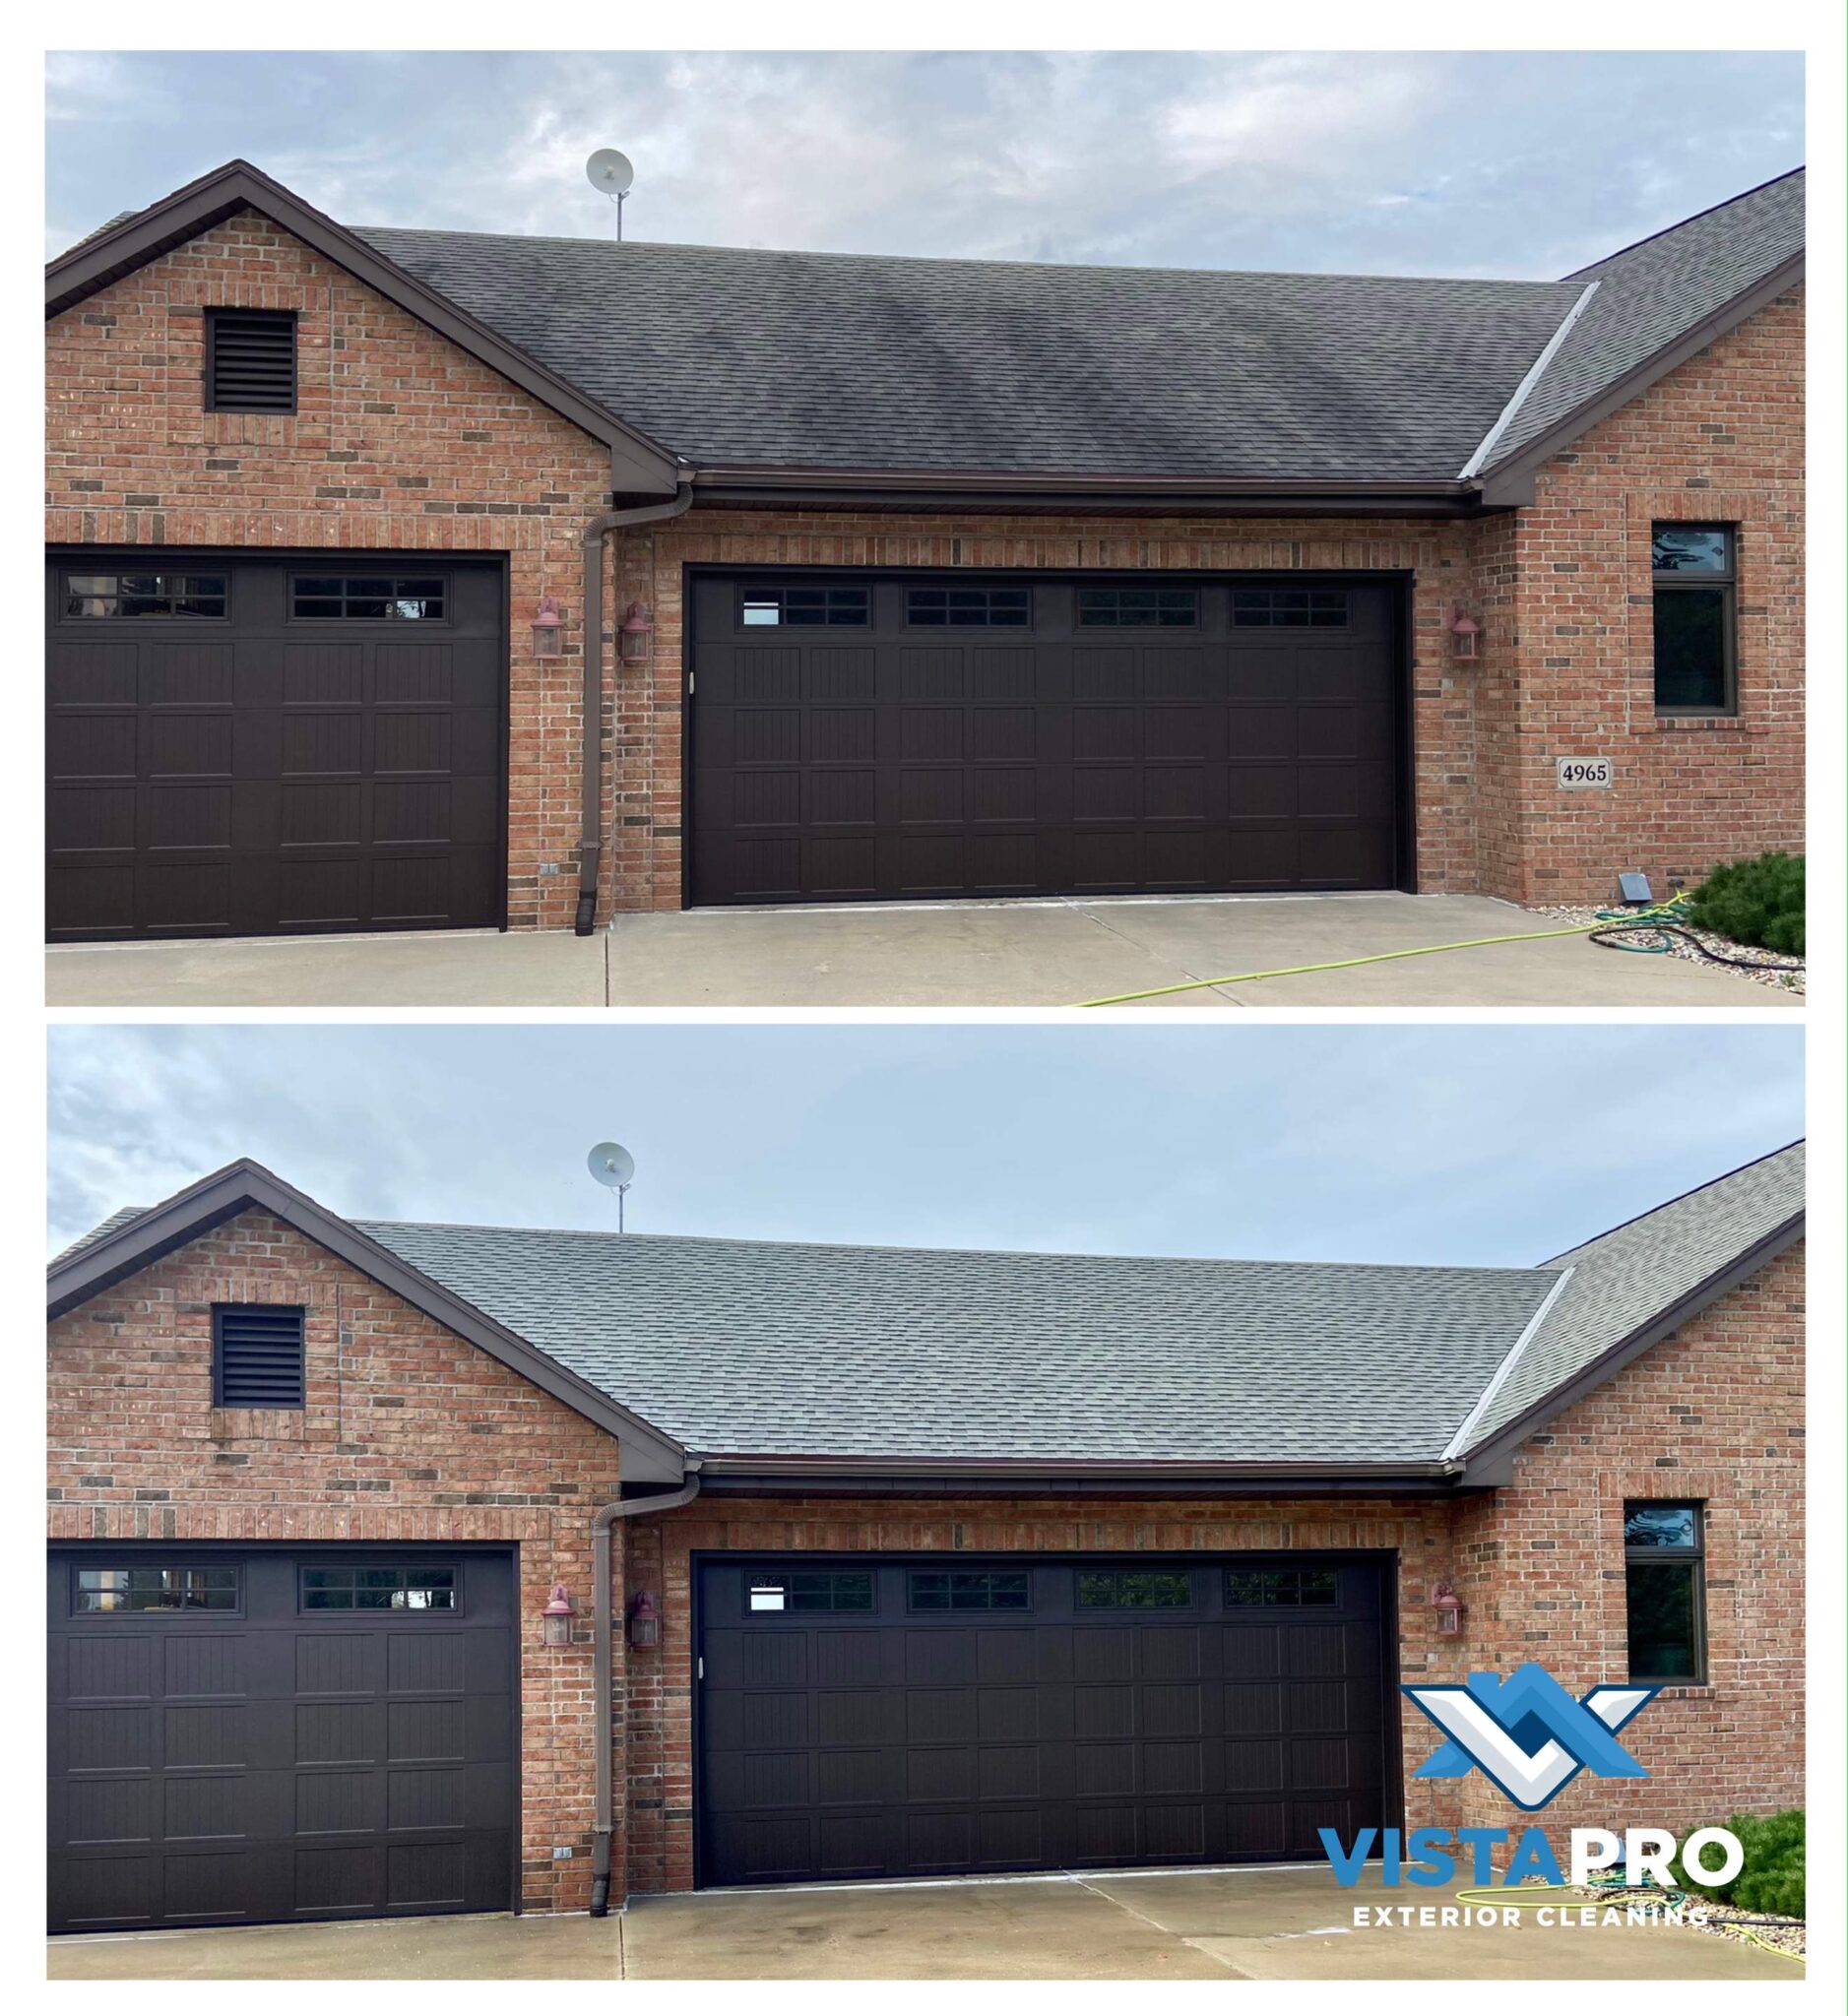 Before and after photo of a roof in Slinger that Vista Pro cleaned